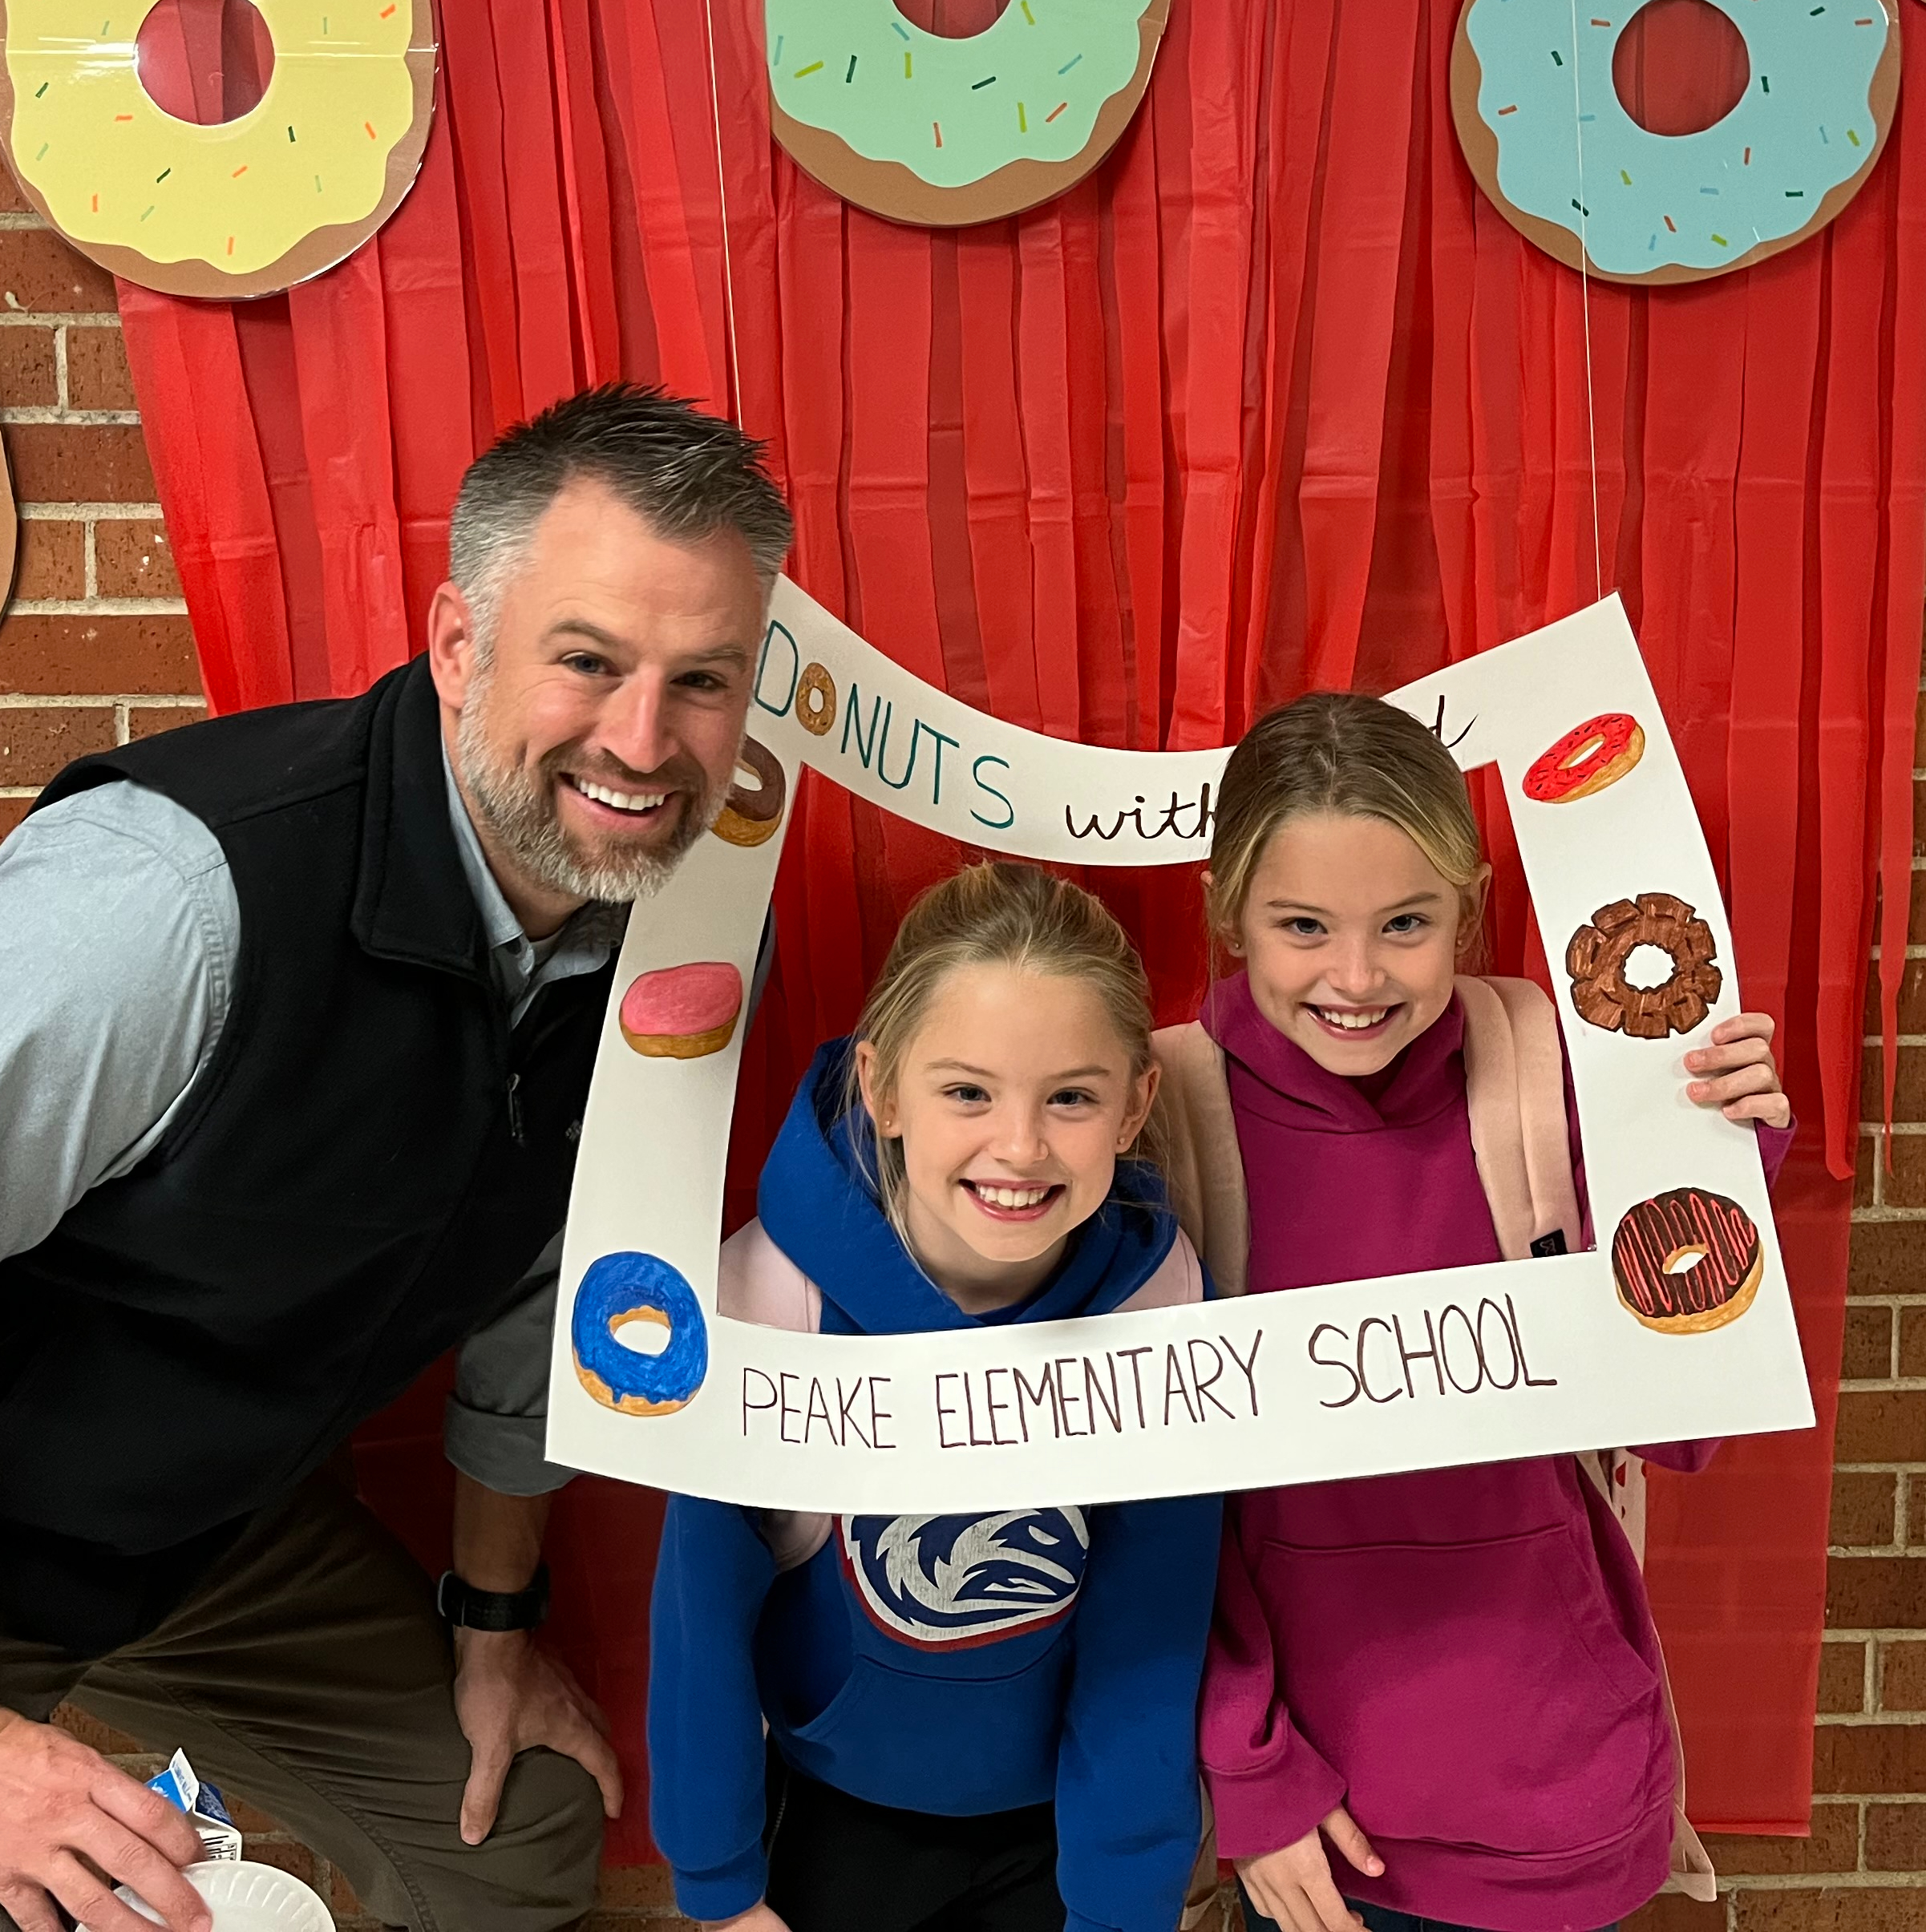 children and dad smiling in a picture frame that says "donuts with Dads"